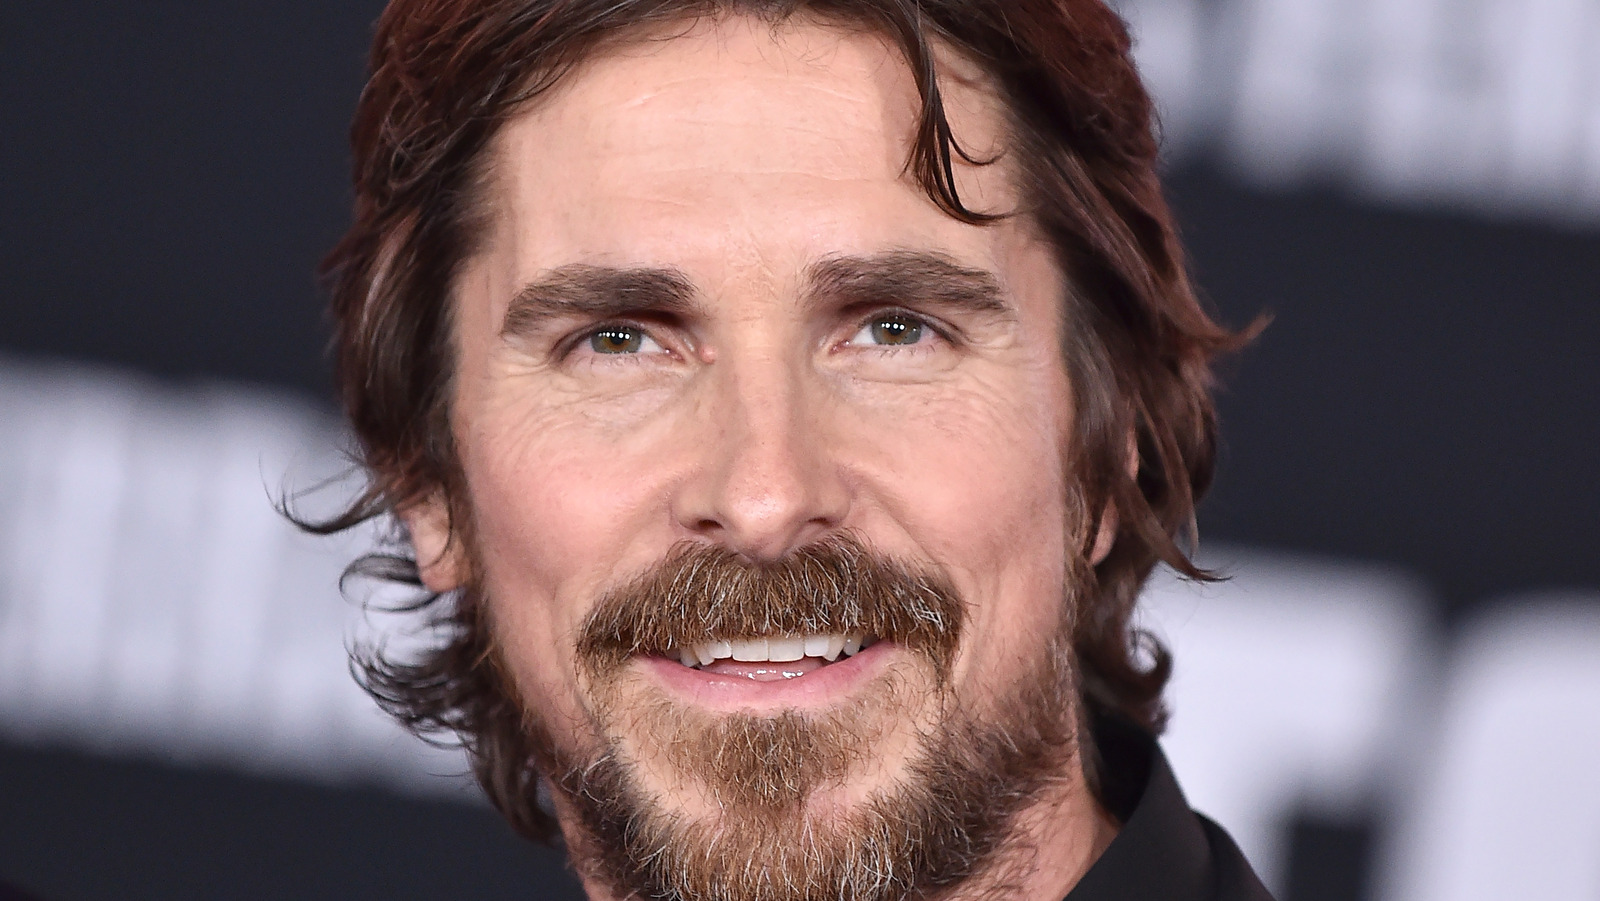 Every Christian Bale Movie Ranked